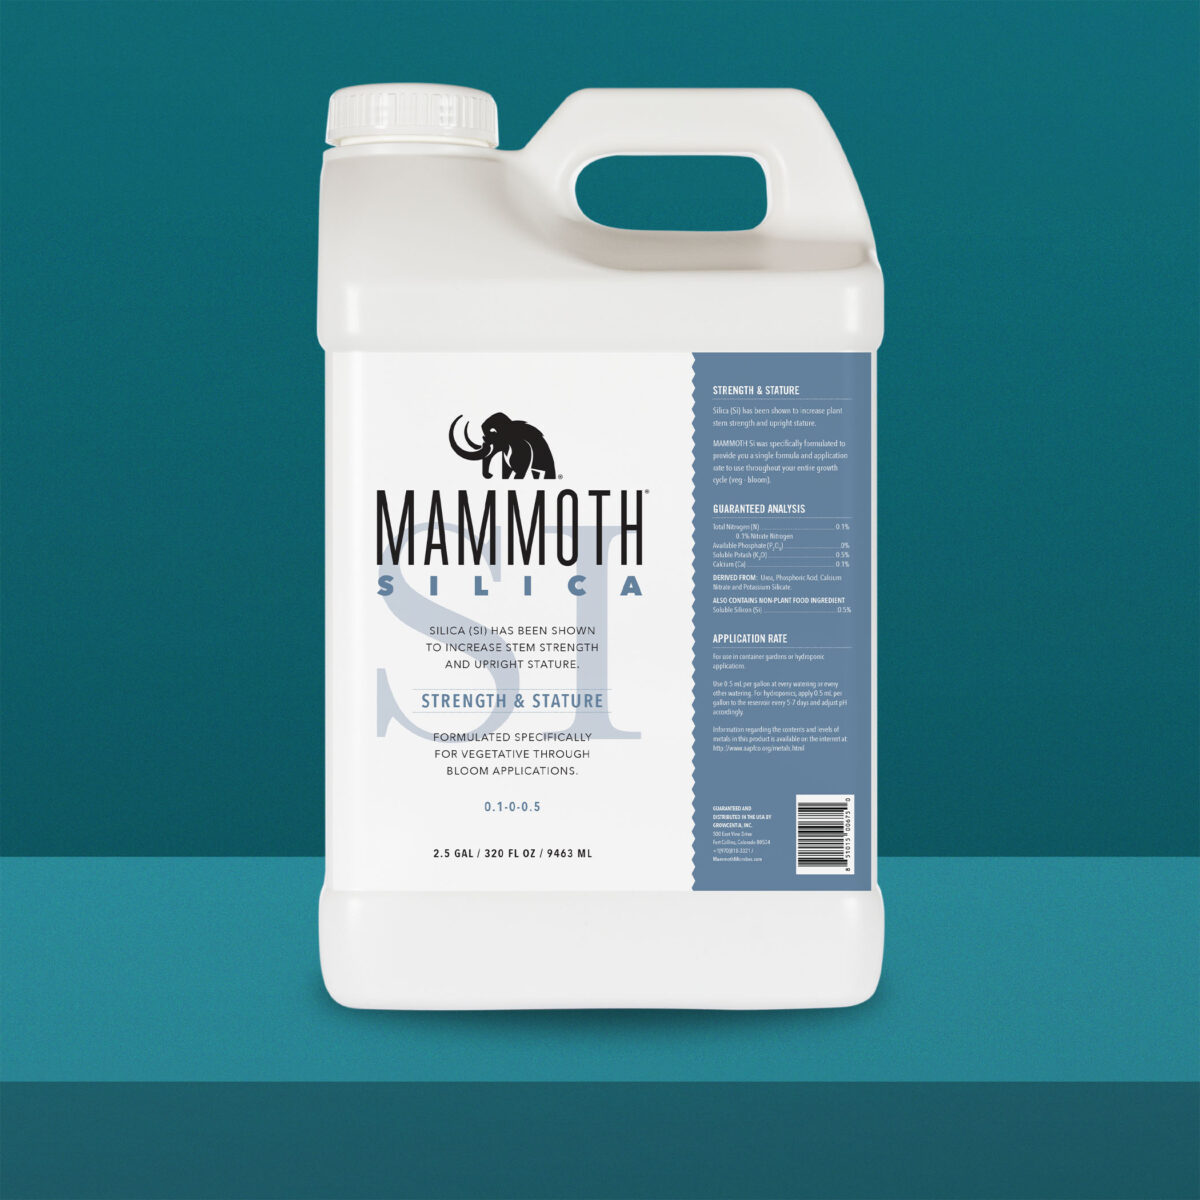 Mammoth Silica 2.5 Gallons Product Image